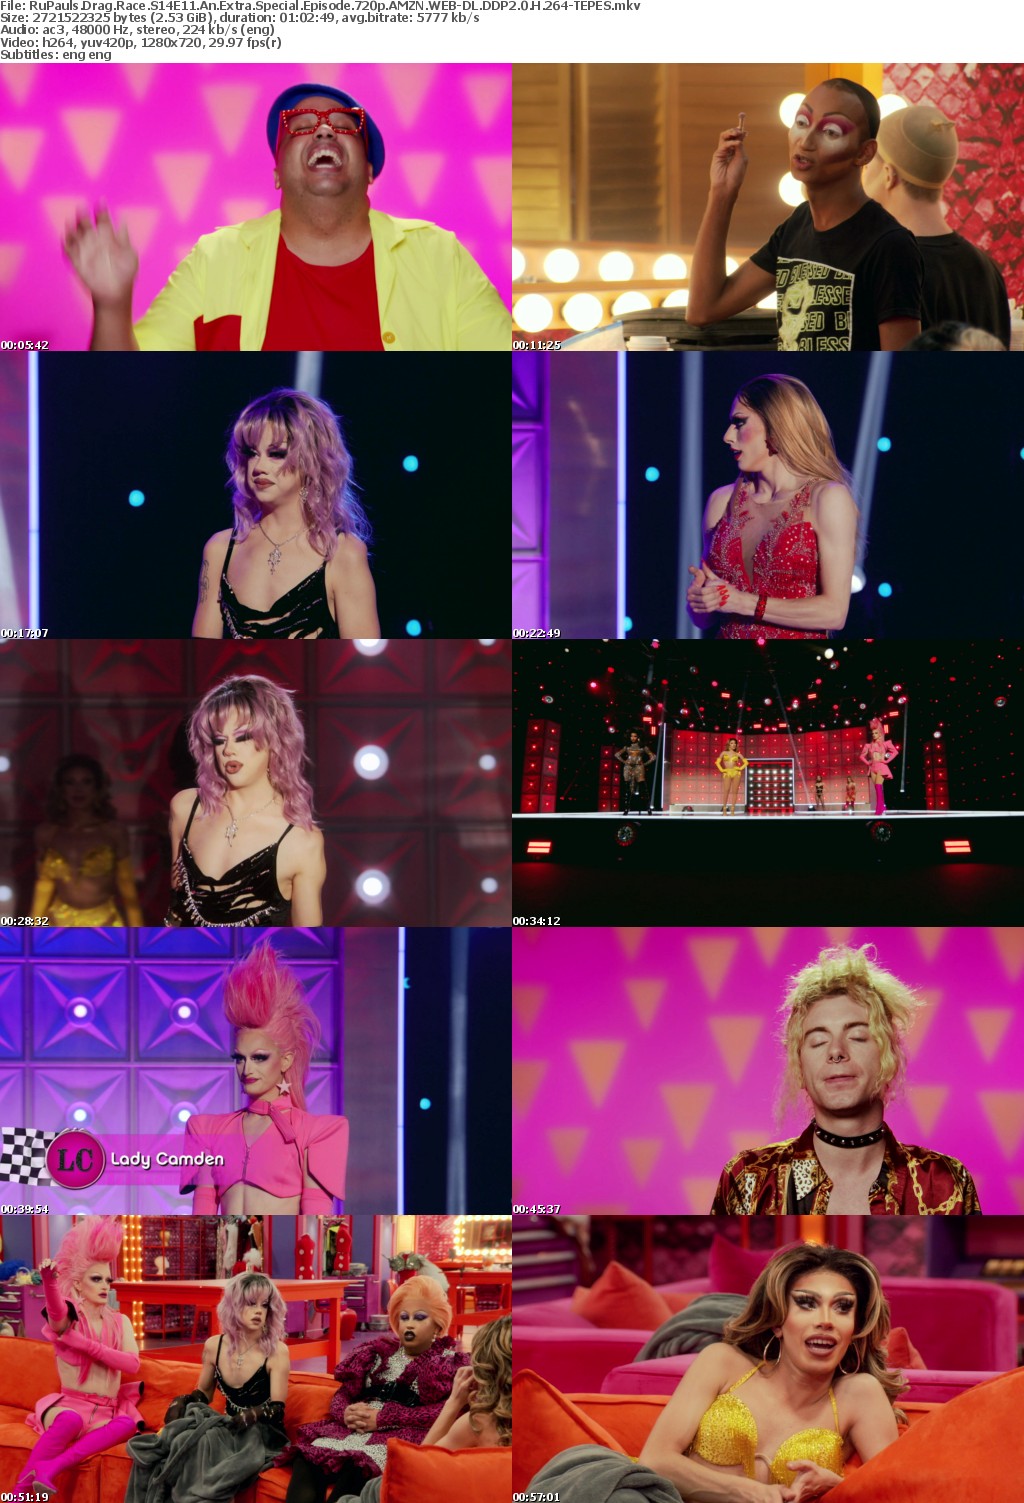 RuPauls Drag Race S14E11 An Extra Special Episode 720p AMZN WEBRip DDP2 0 x264-TEPES